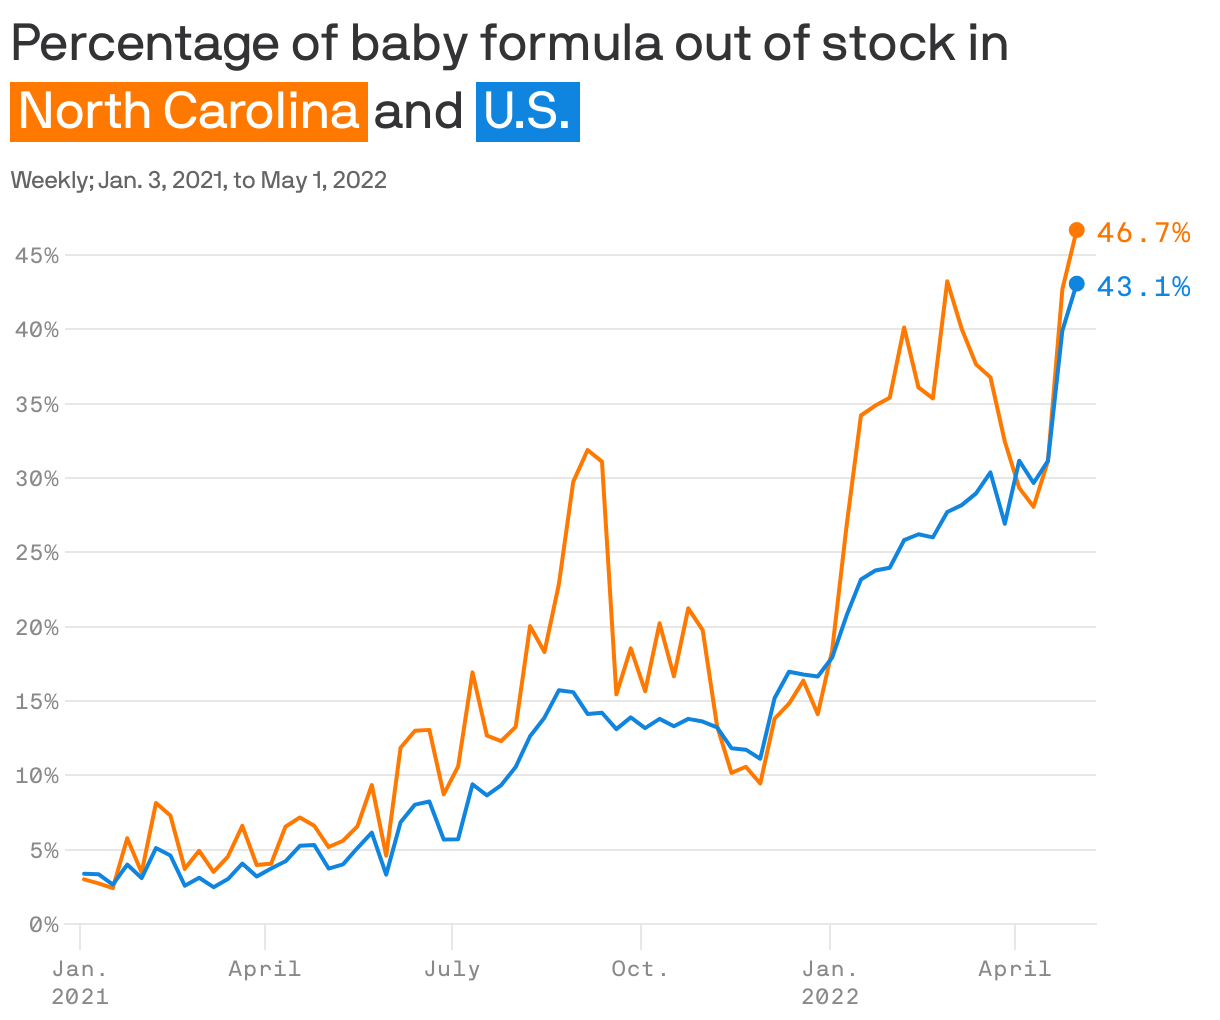 Percentage of baby formula out of stock in <span style="color: white; background-color:#ff7900; padding: 2px 4px; margin-right:3px; white-space: nowrap;">North Carolina</span>and <span style="color: white; background-color:#1085df; padding: 2px 4px; margin-right:3px; white-space: nowrap;">U.S.</span>